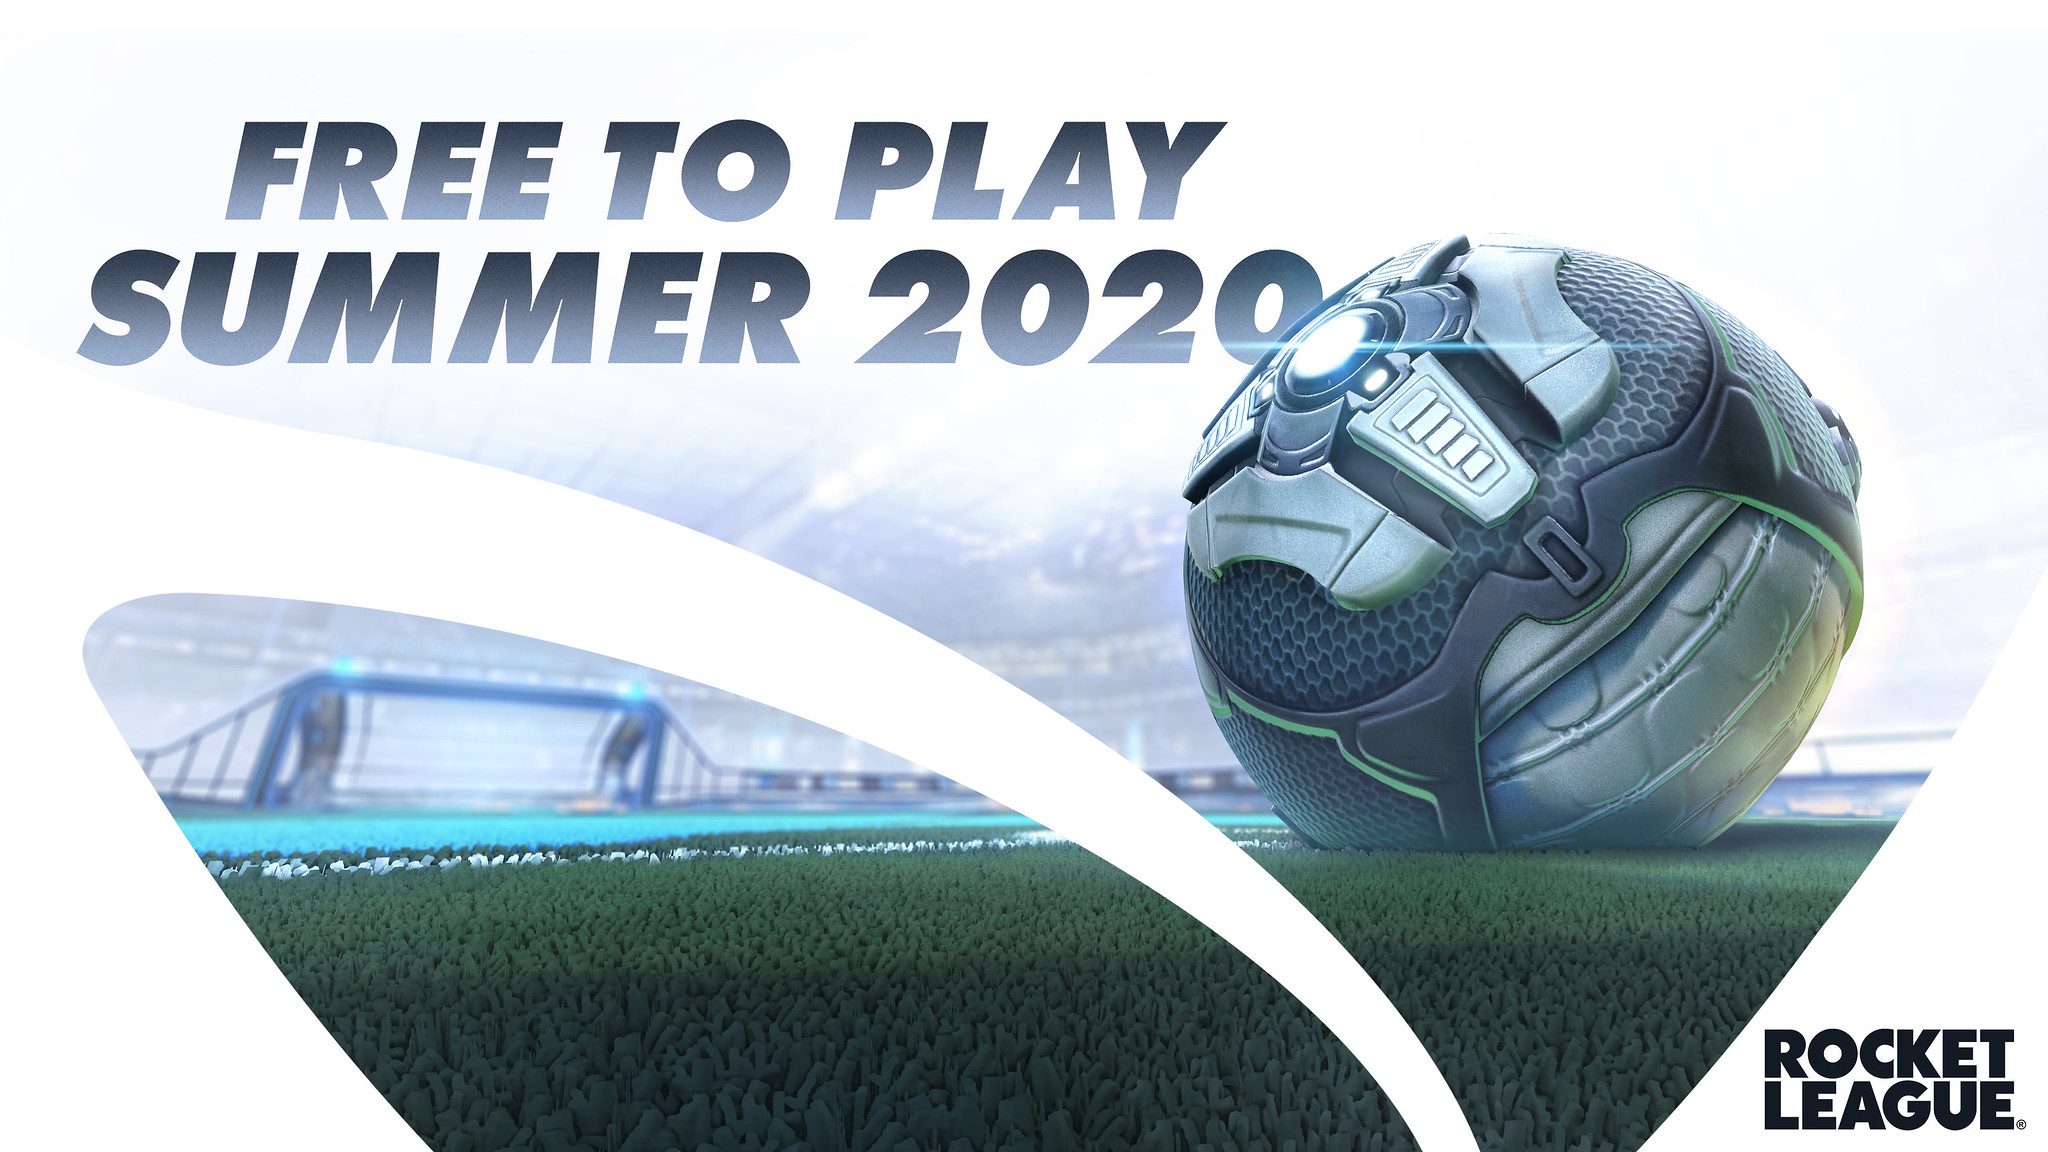 Rocket League goes free to play this summer